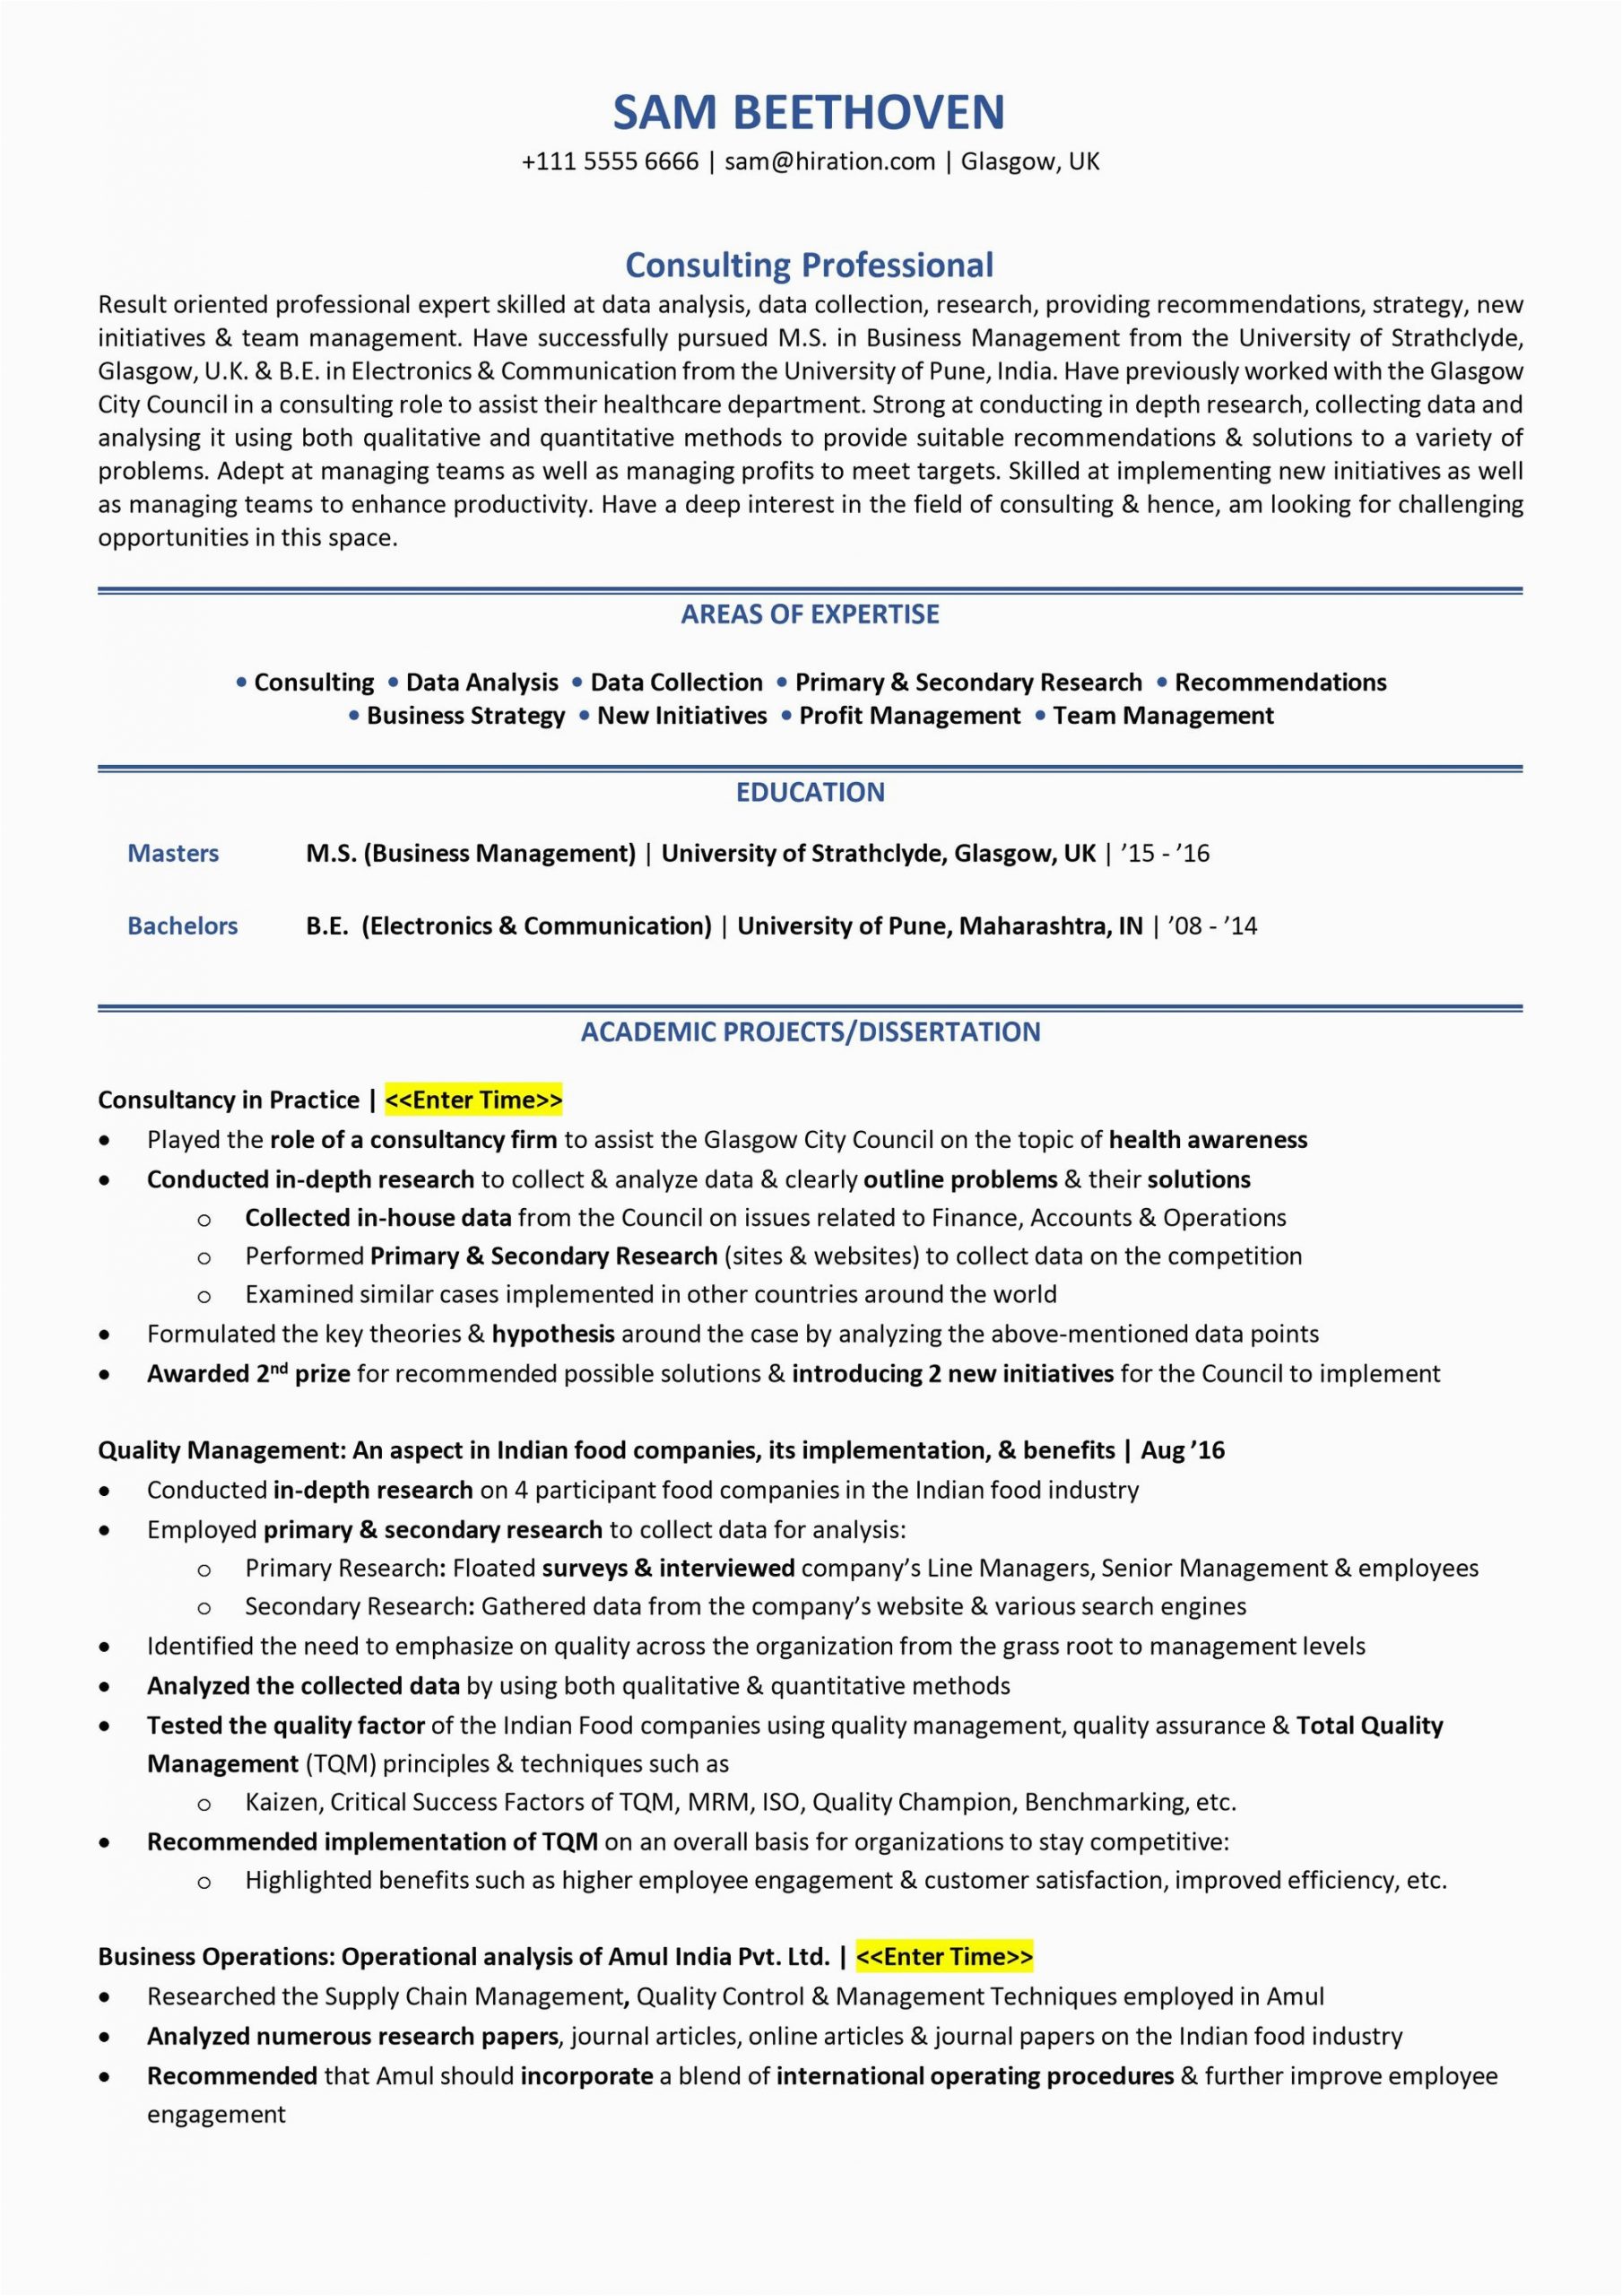 Resume Samples for On Campus Jobs 15 Sample College Resume